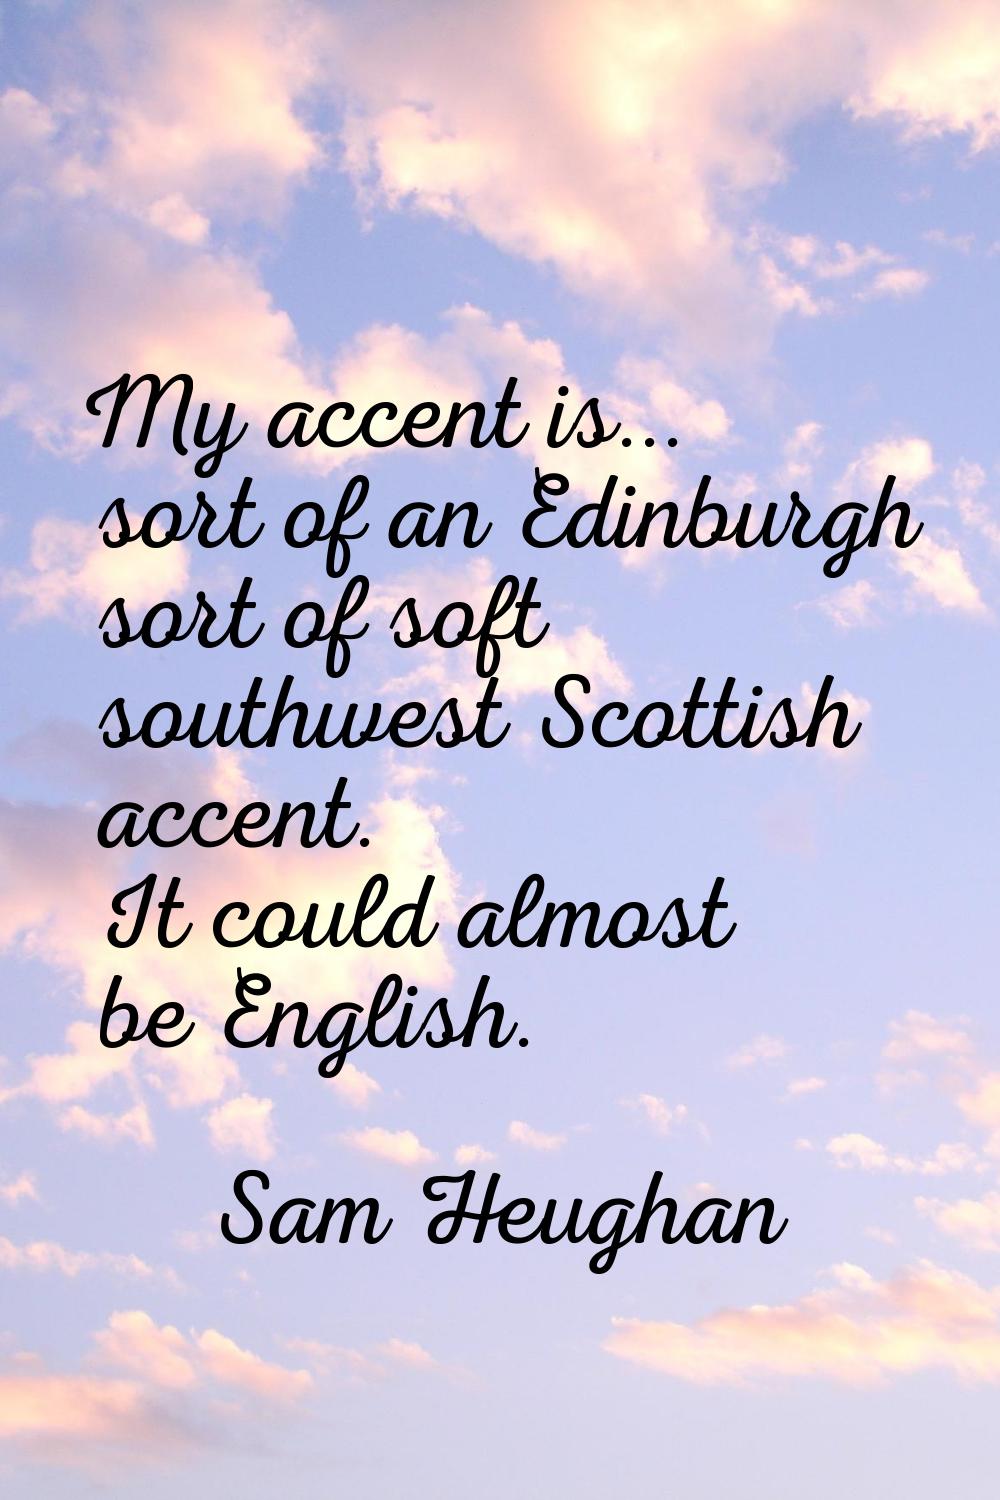 My accent is... sort of an Edinburgh sort of soft southwest Scottish accent. It could almost be Eng